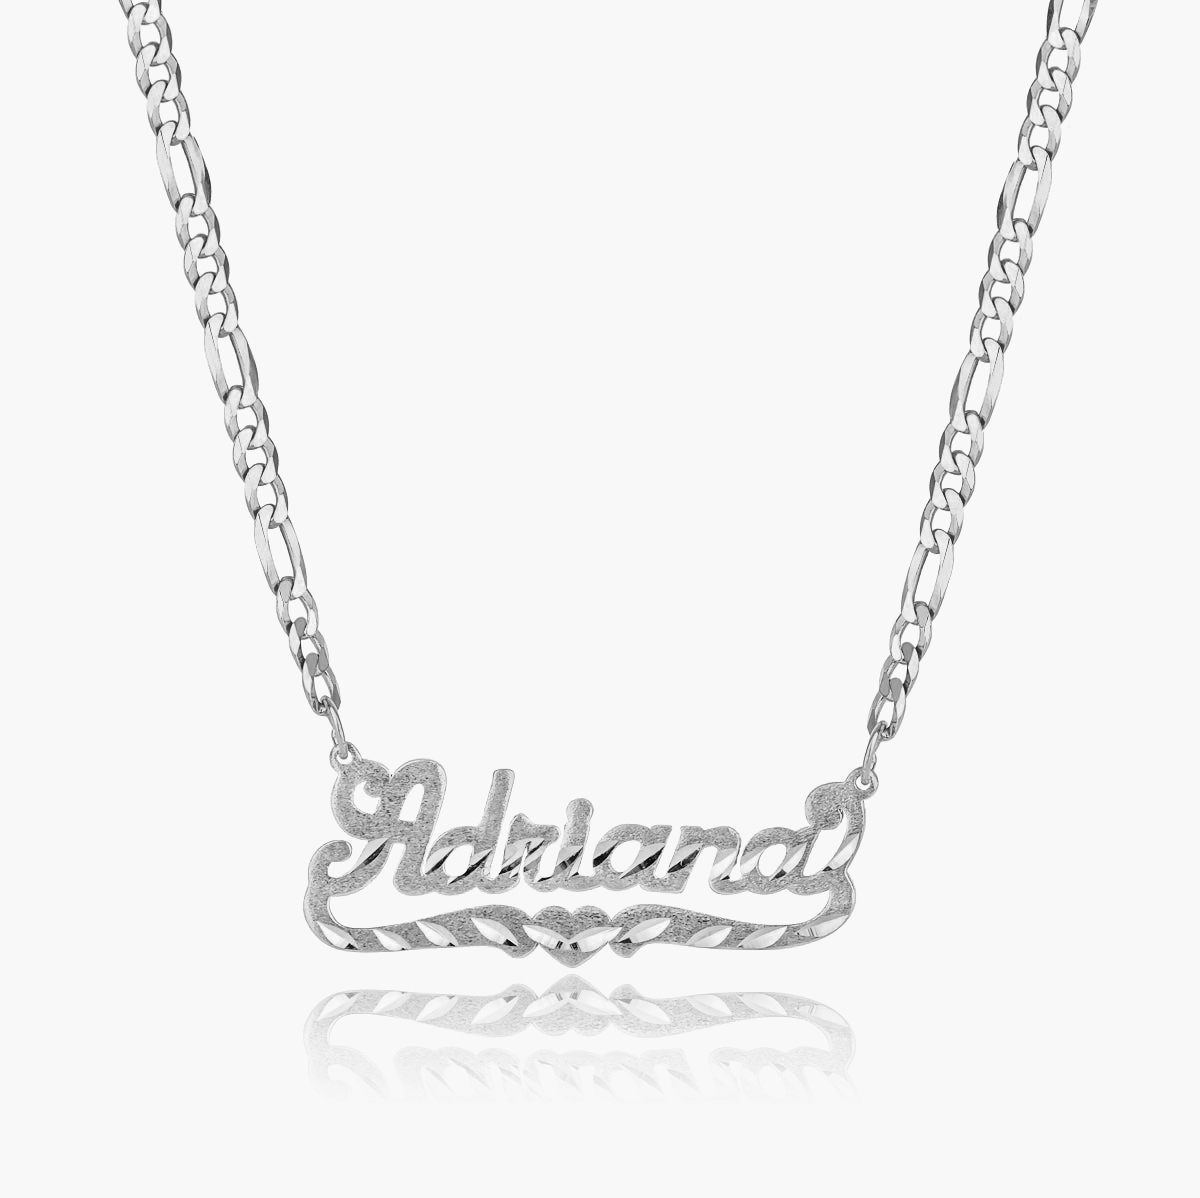 Sterling Silver Diamond Cut Link Chain Necklace - A New Day Silver